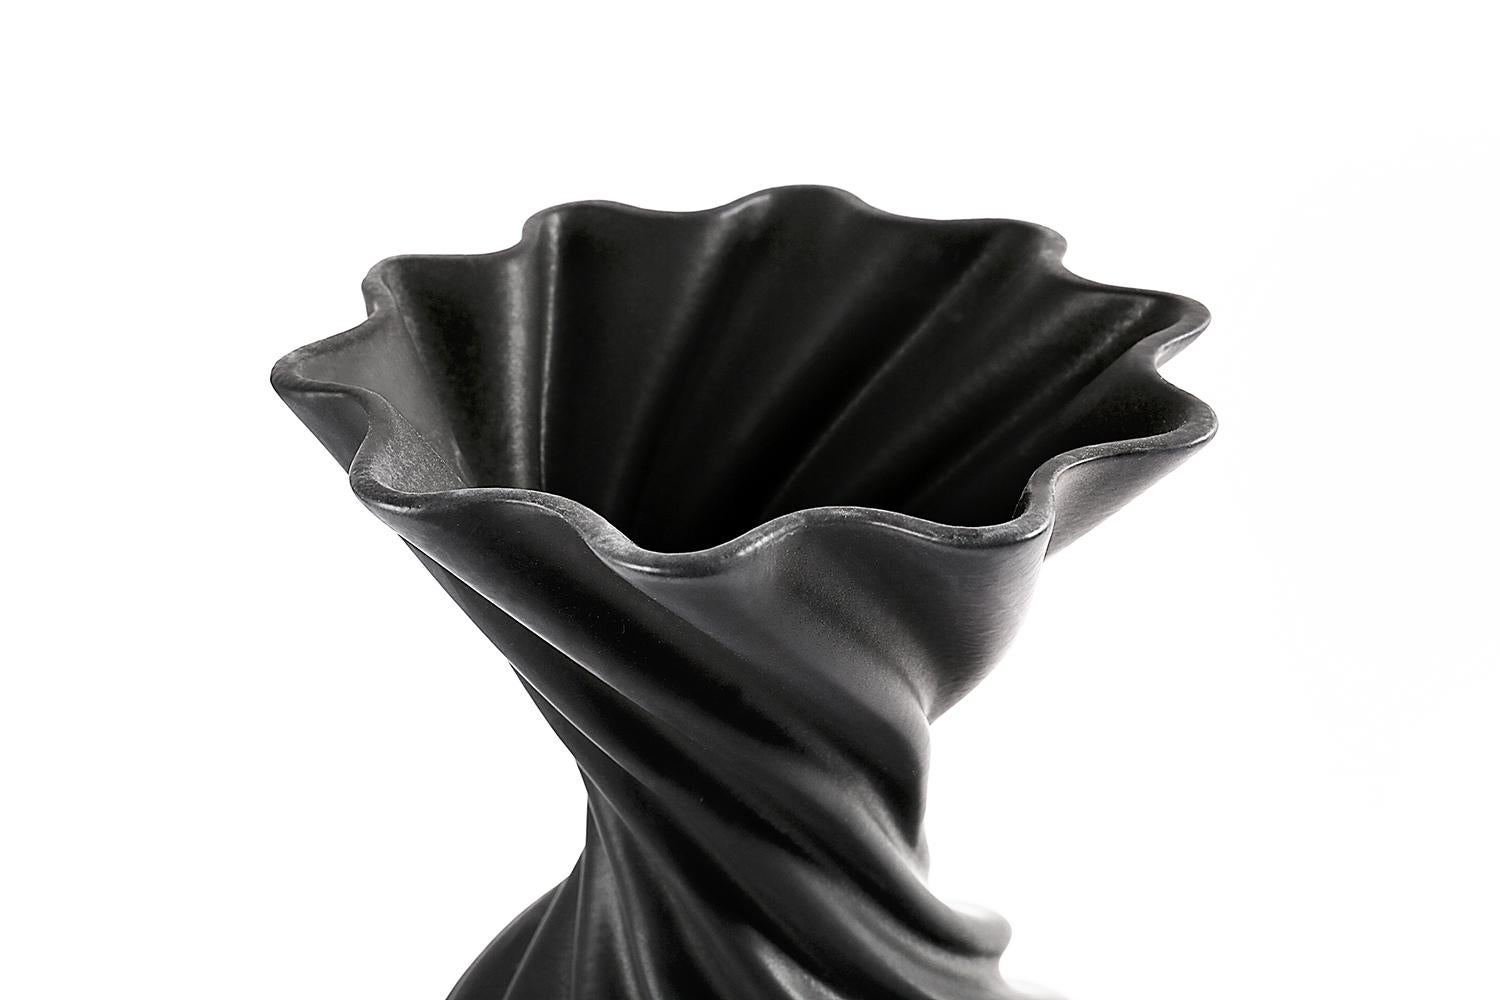 Miss Jolie is a decorative ceramic vase that pauses movement; like a cloth, its folds reveal an ironic static dynamism. Designed by Joel Escalona as part of his Personal Edition collection.

Joel, one of the most prolific and multidisciplinary